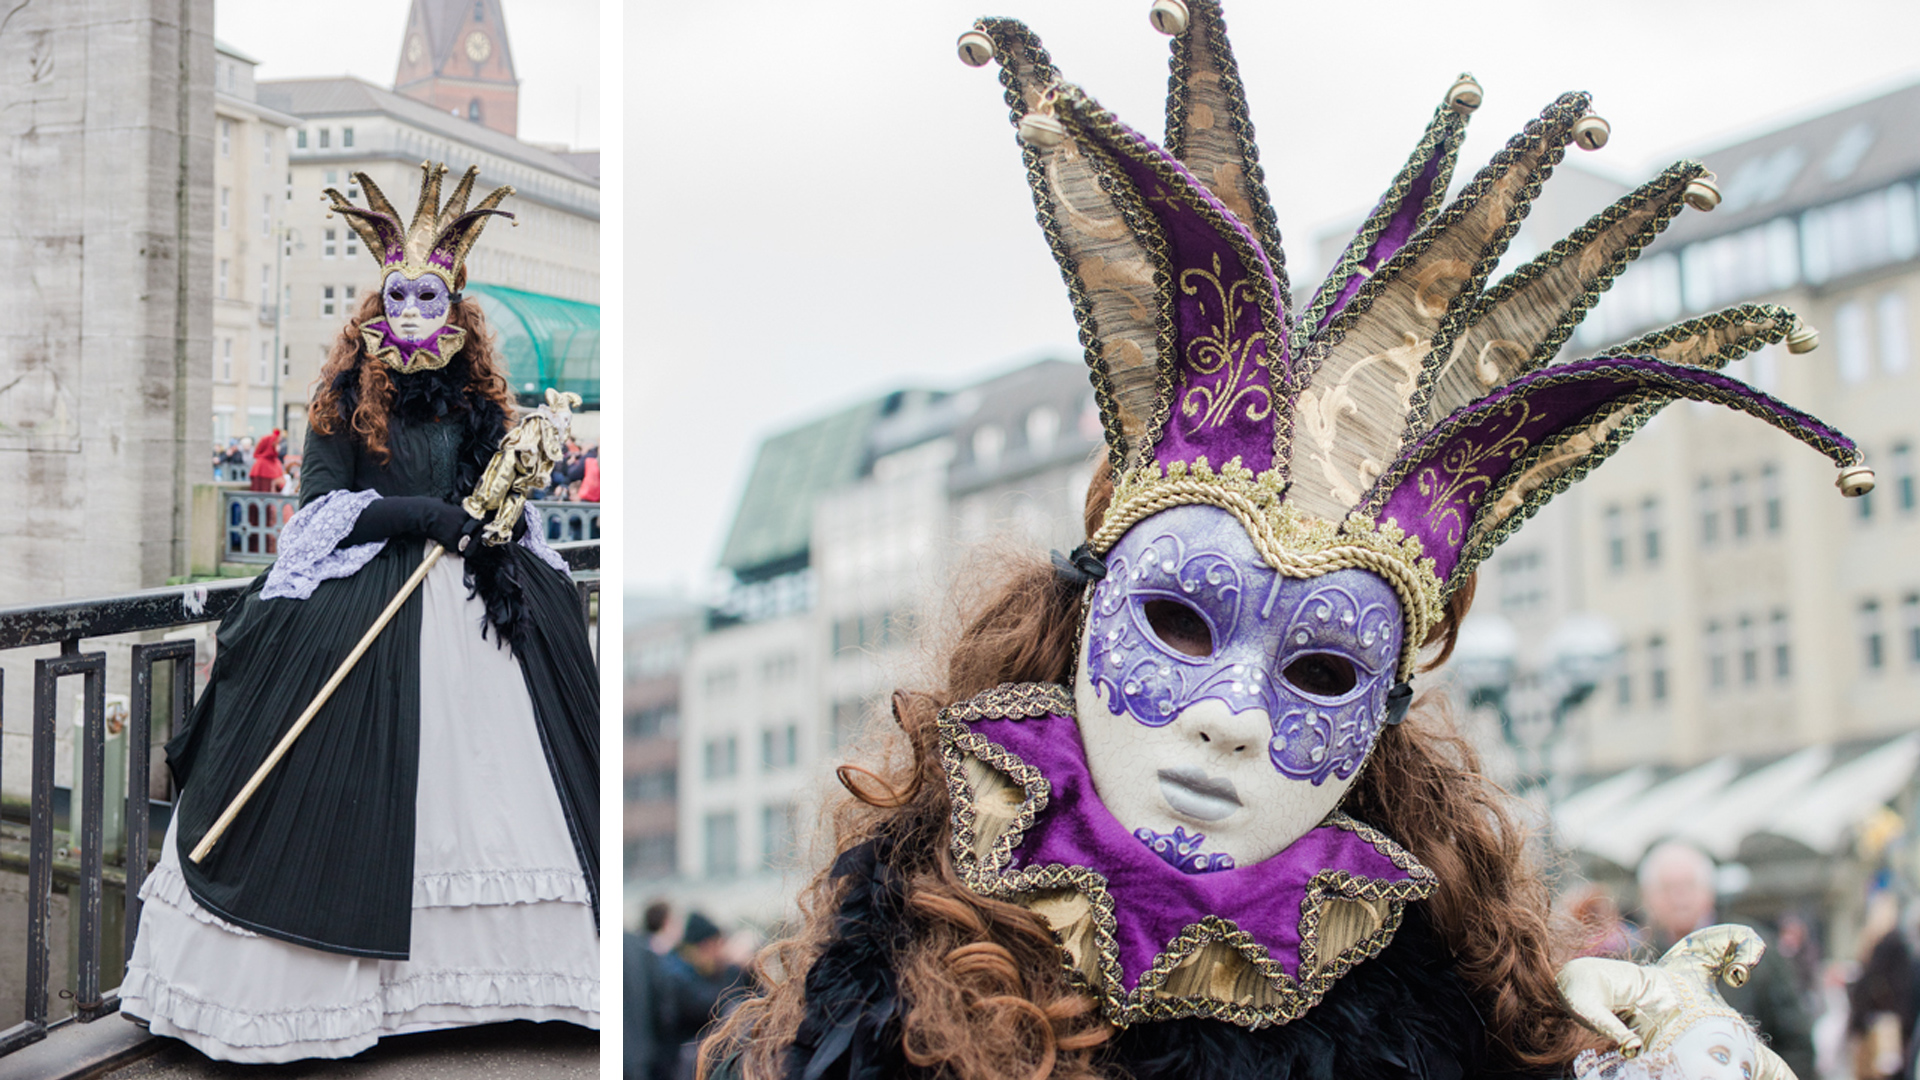 A woman in costume and mask for Carnival.